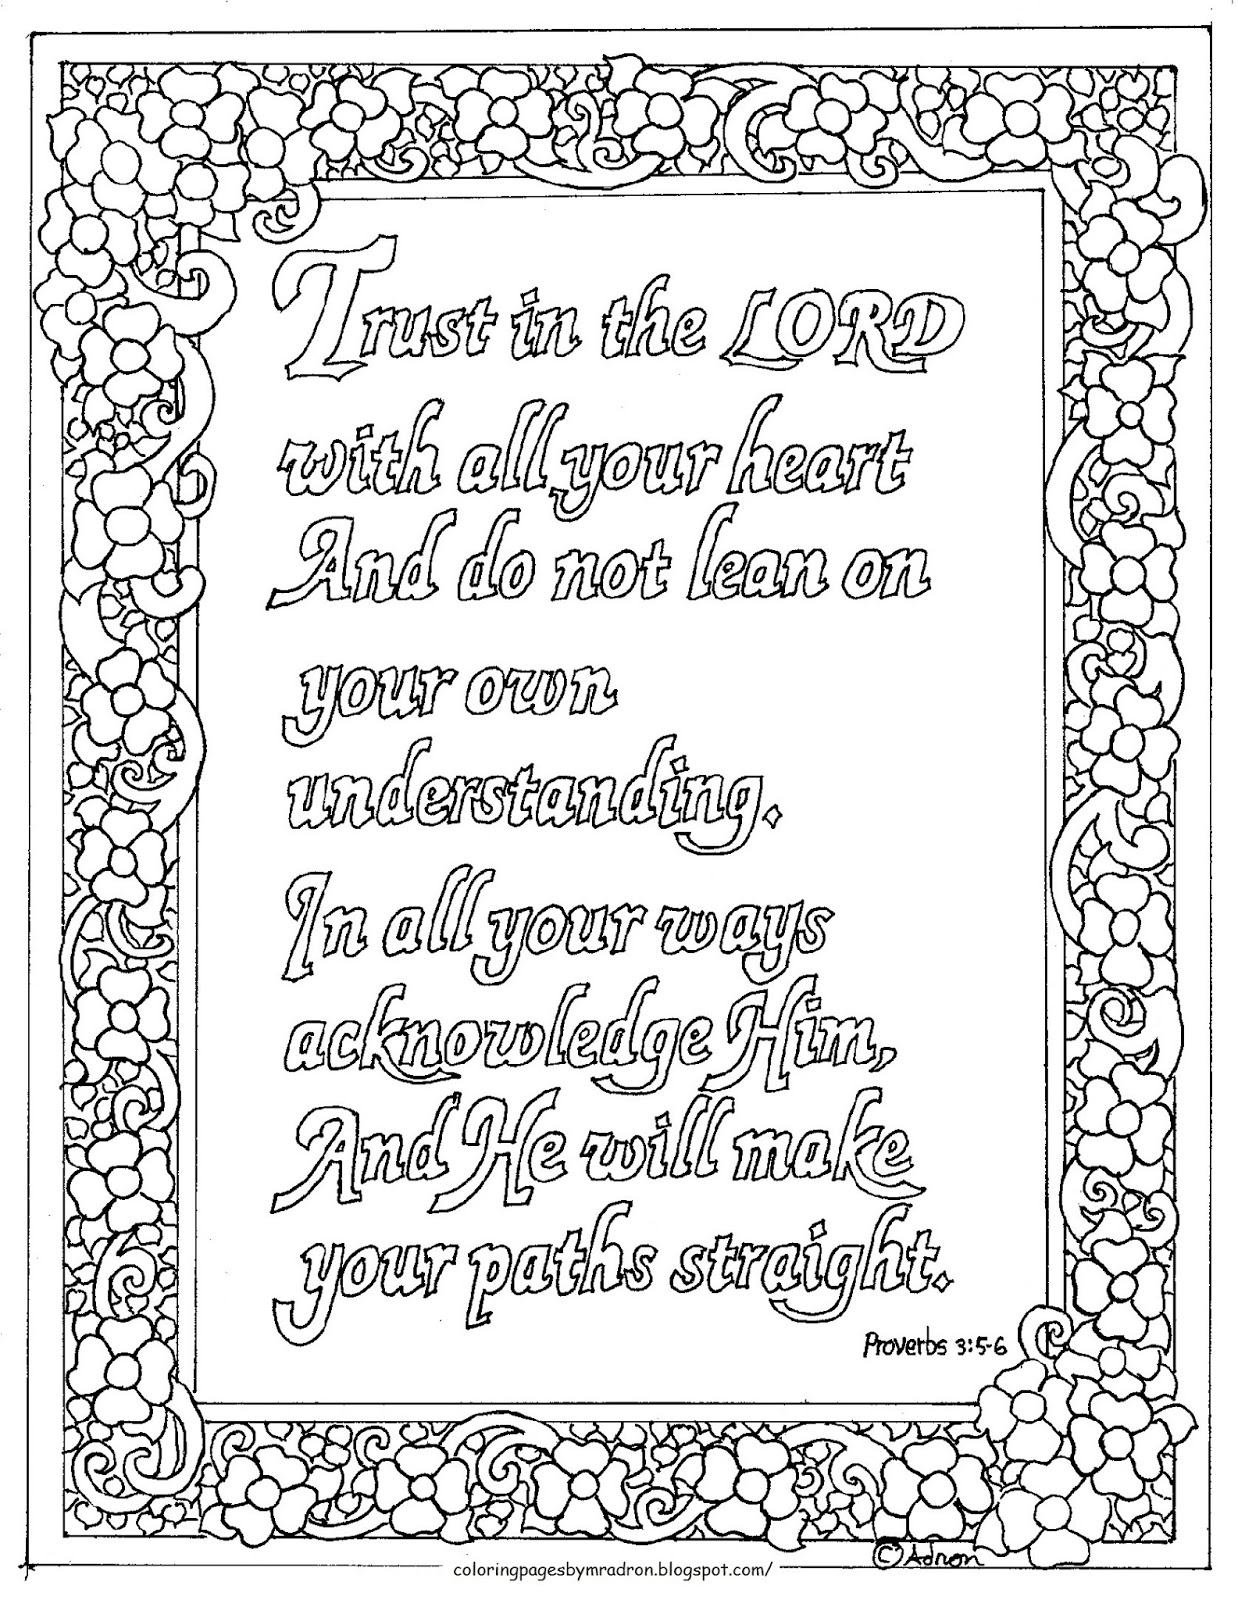 coloring-pages-for-kids-by-mr-adron-printable-proverbs-3-5-6-trust